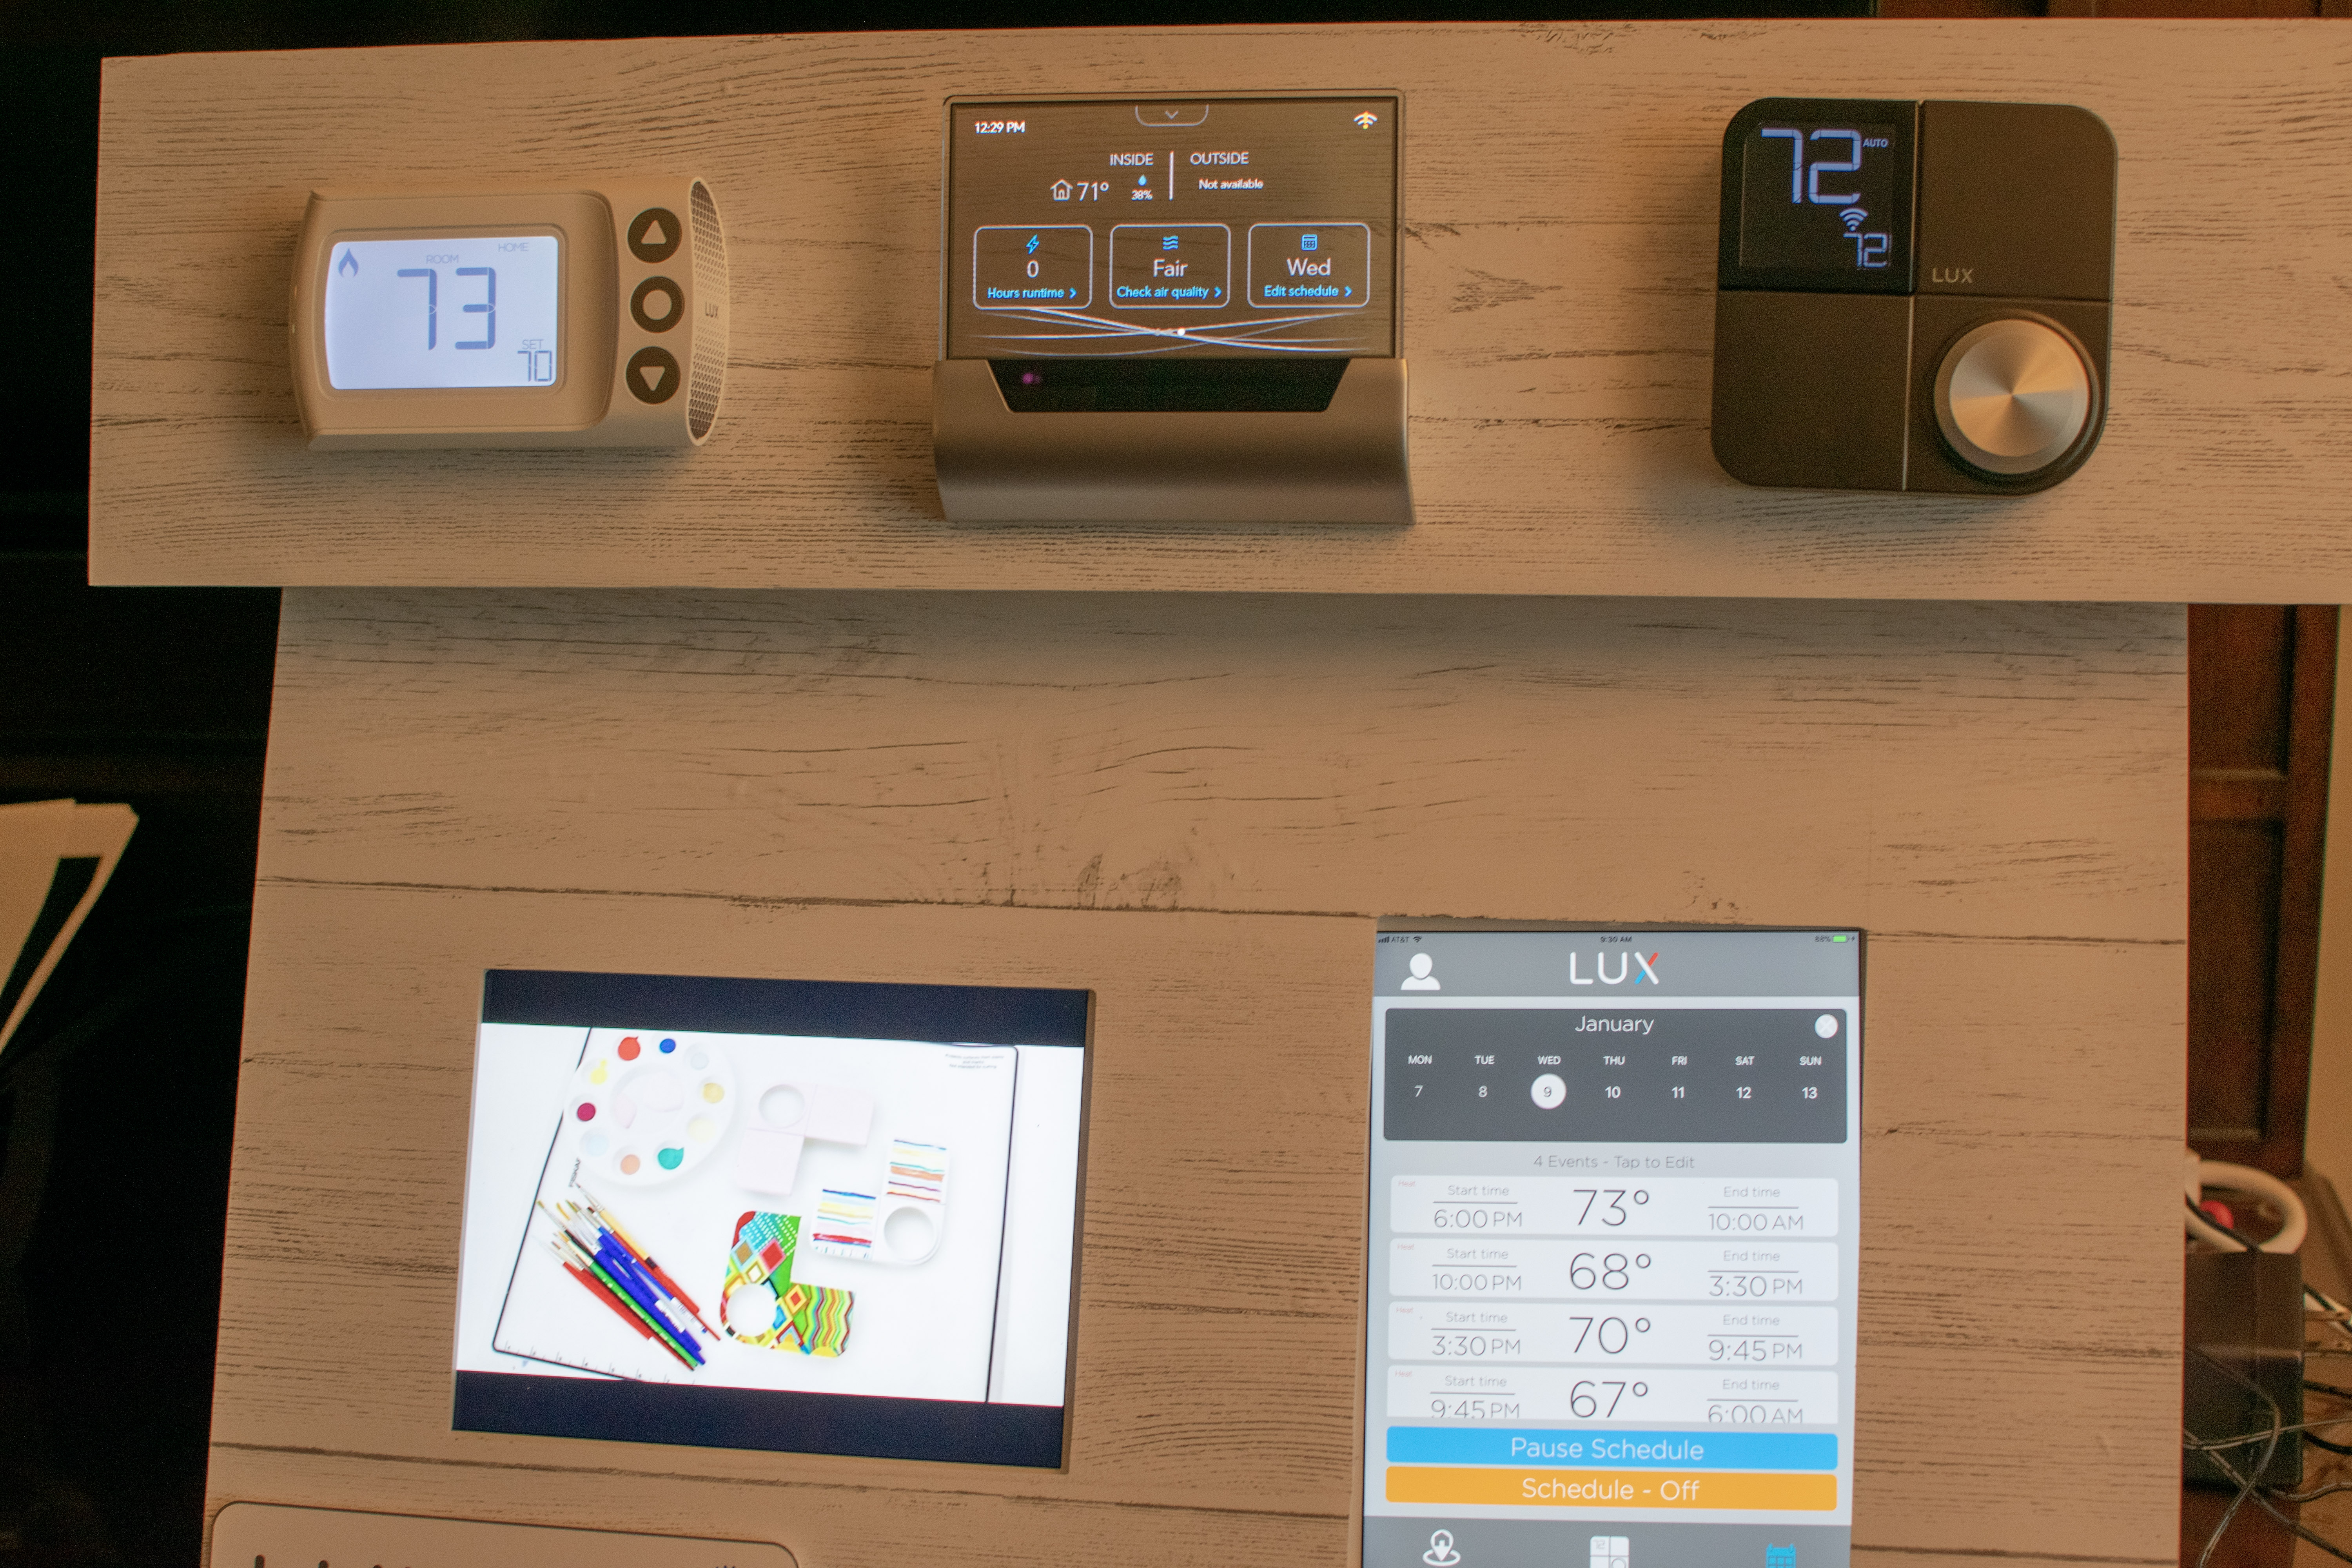 Johnson Controls & LUX smart thermostats at CES 2019 use various design methods, some with OLED touchscreen artistic flair while others have a more traditional appearance, targeting all types of Smart Home enthusiasts.